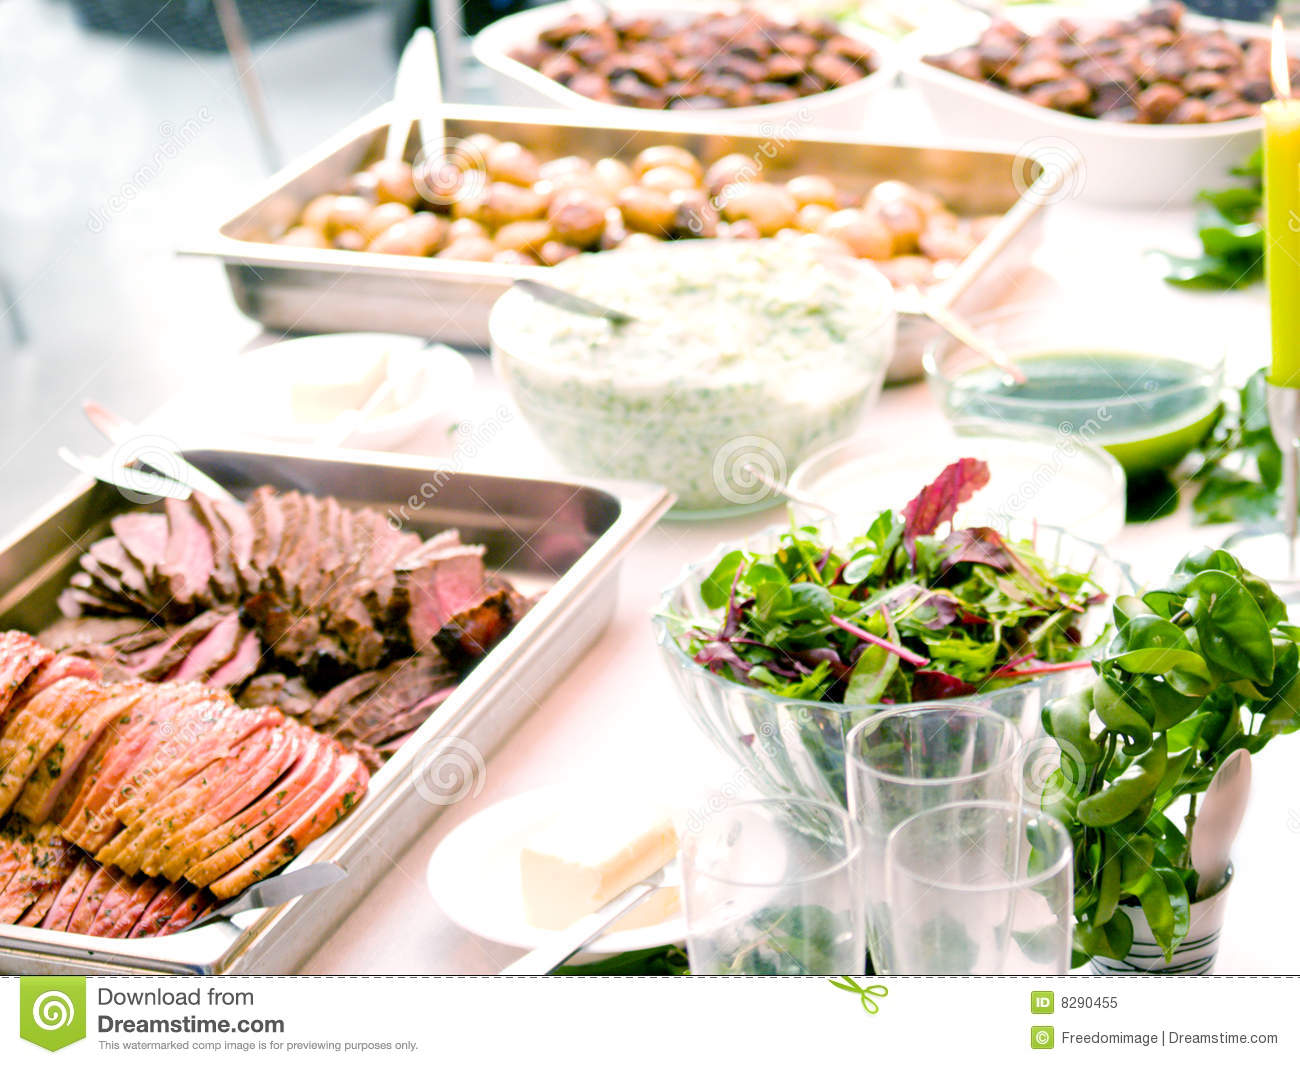 Delicious Food Layout On A Table Royalty Free Stock Photo   Image    